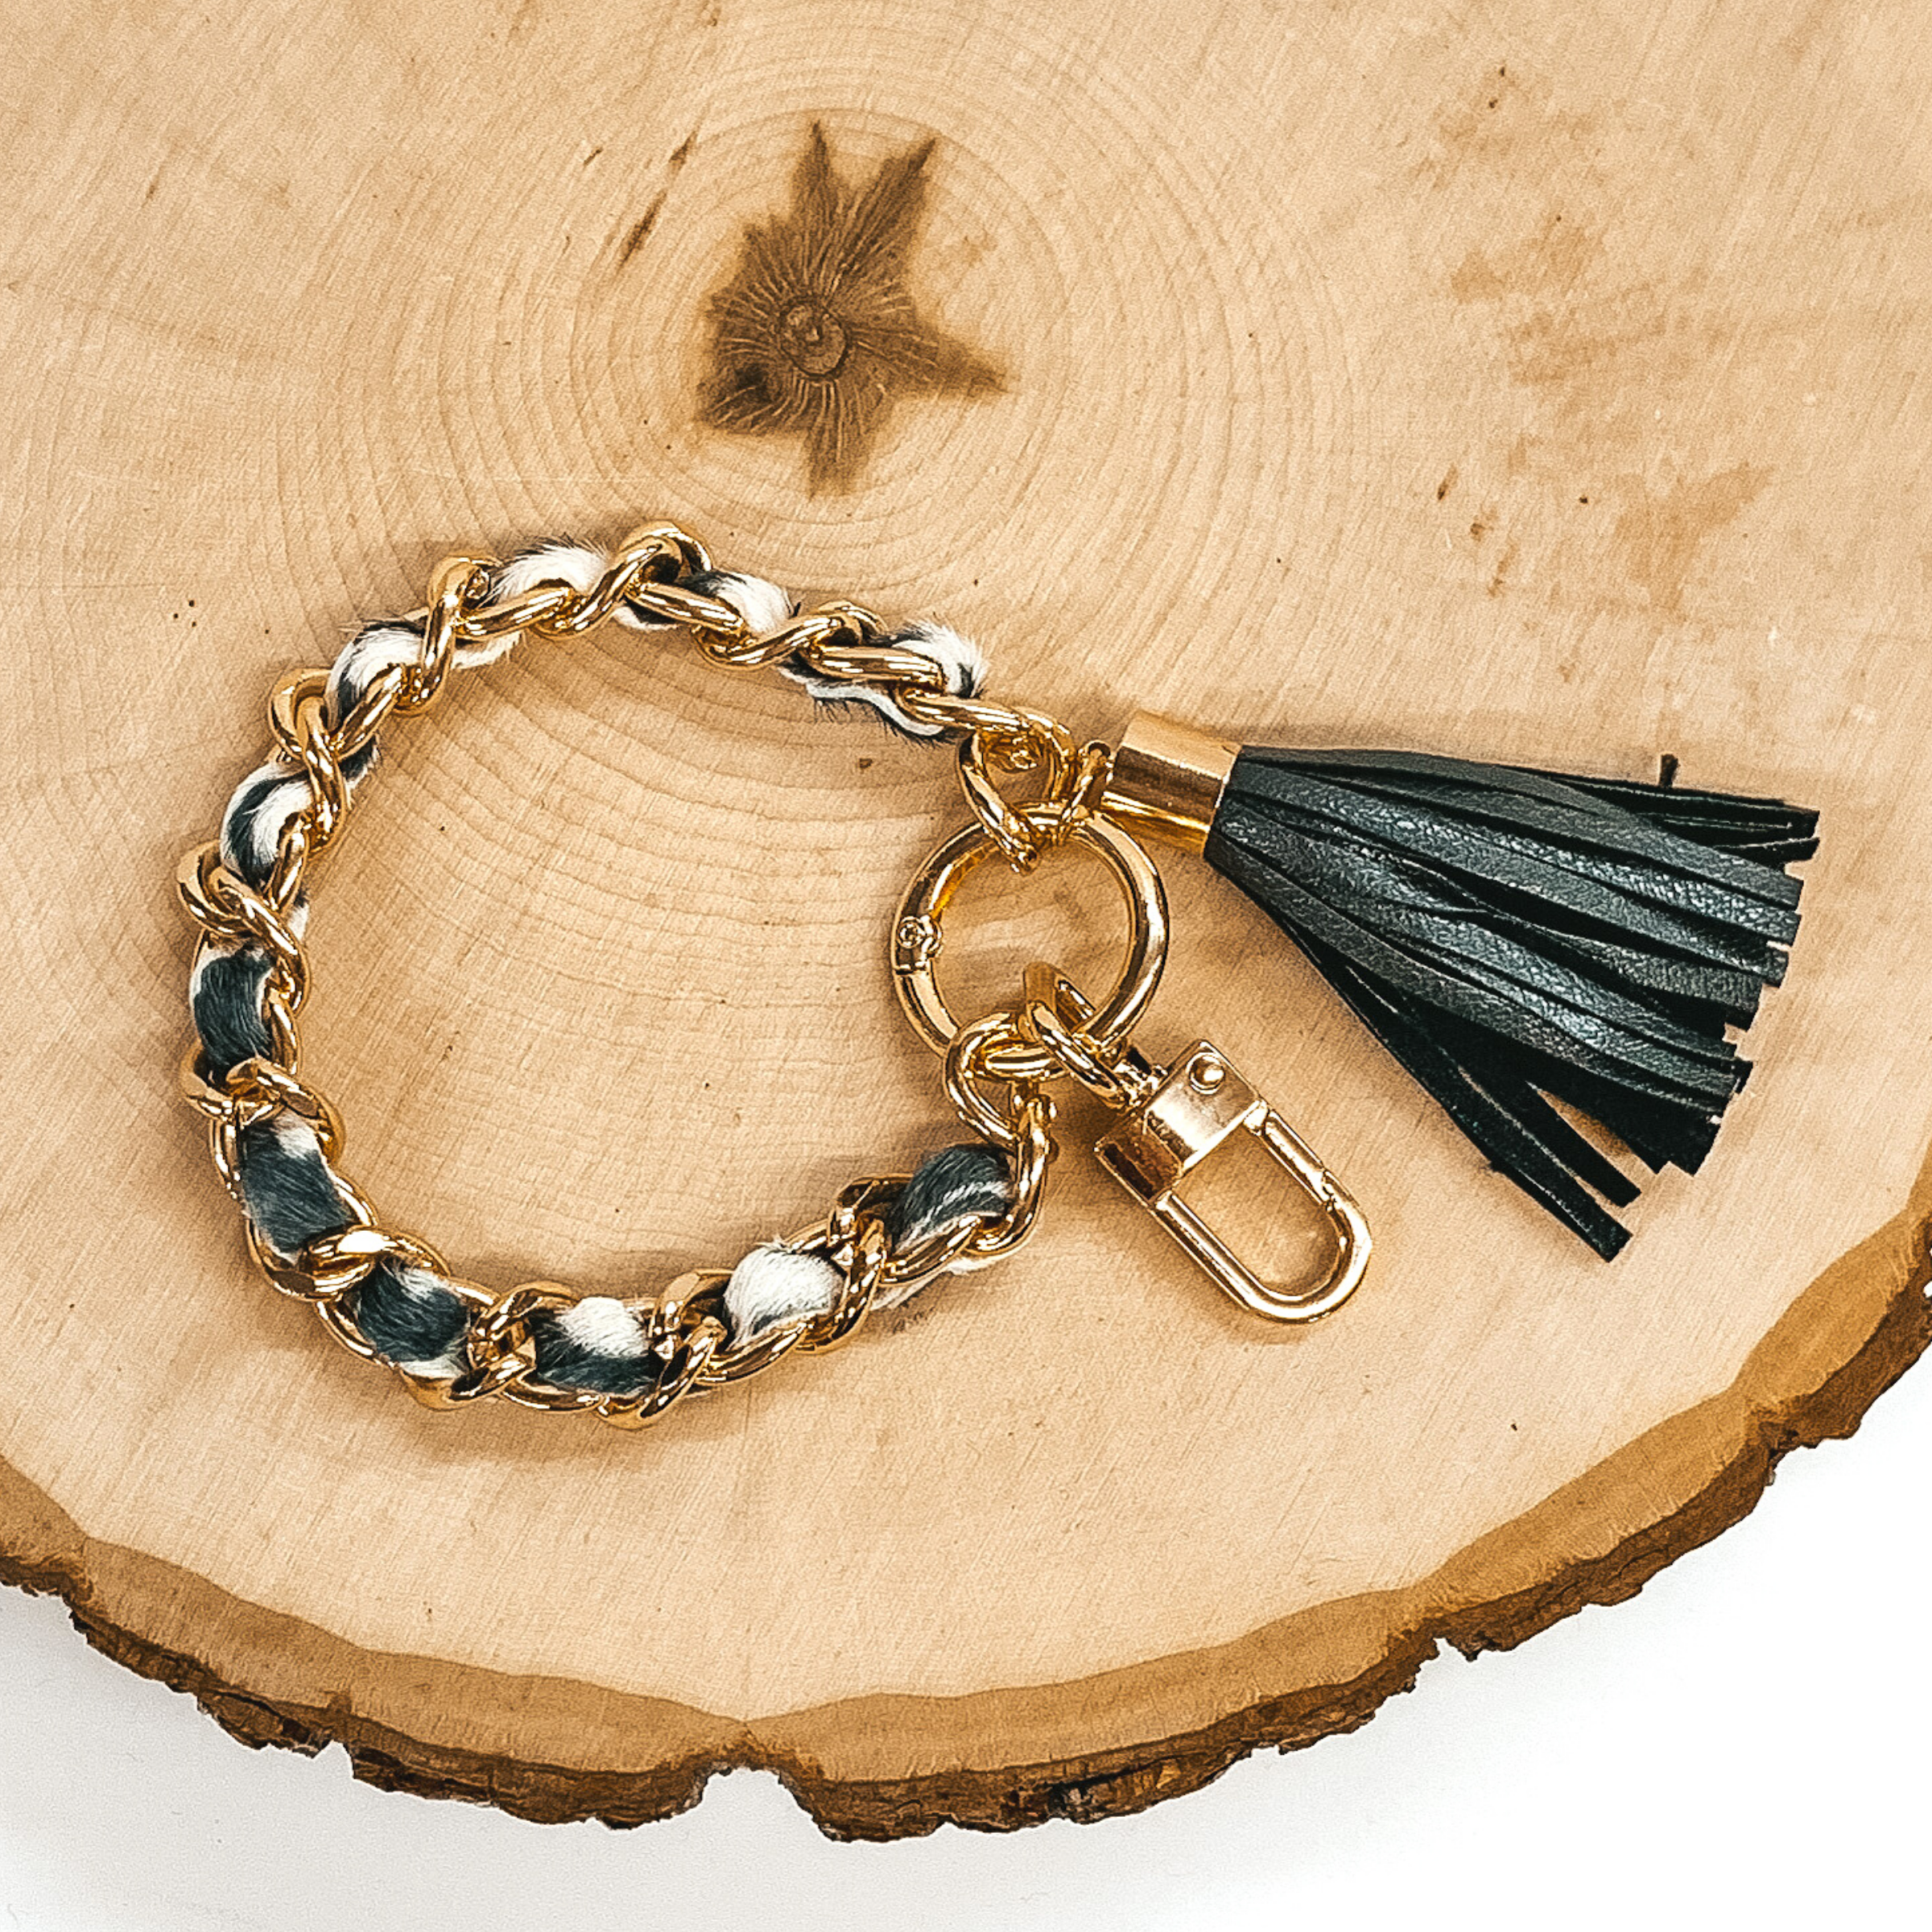 Gold chain link bangle with a cowhide like material running through the link. The material is a black and white color. This bangle has two key chains and a black tassel. It is pictured on a piece of wood on a white background.